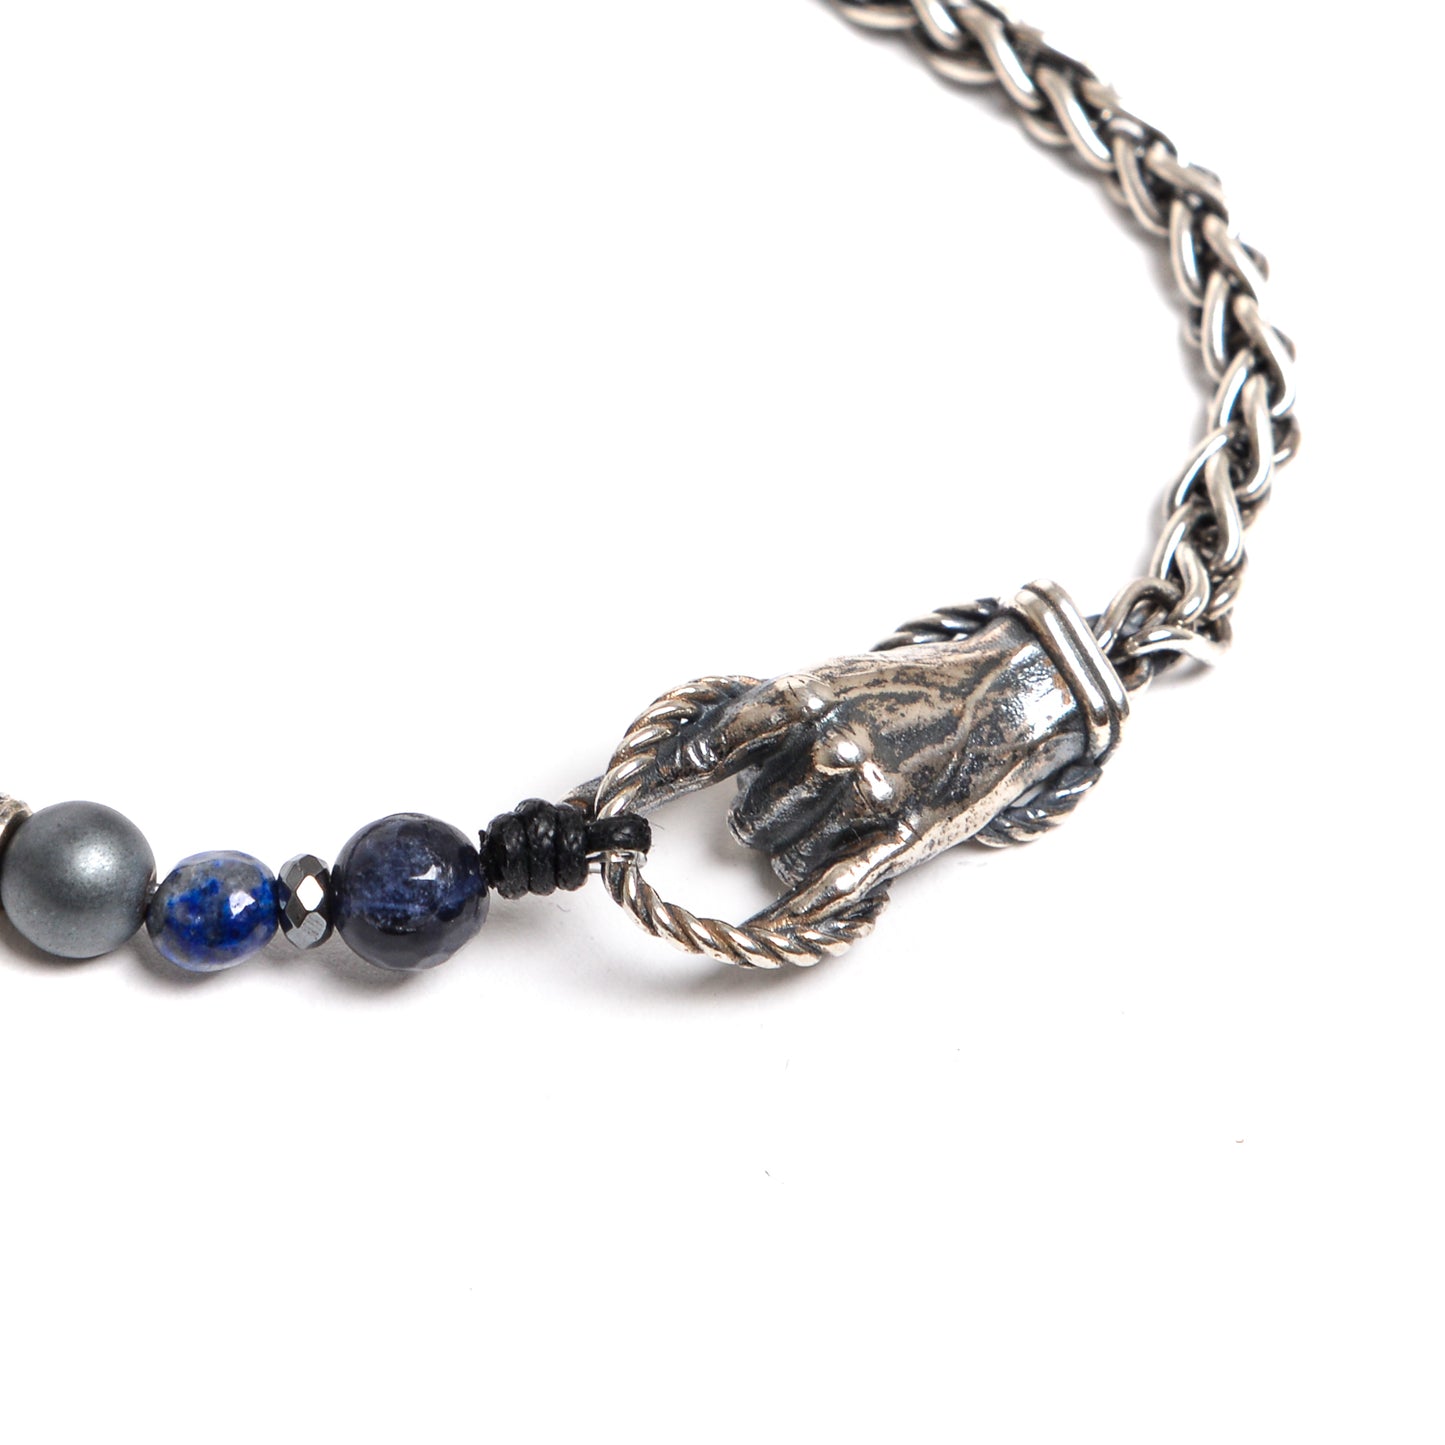 Fusion Blue and "Horn" Chain Bracelet